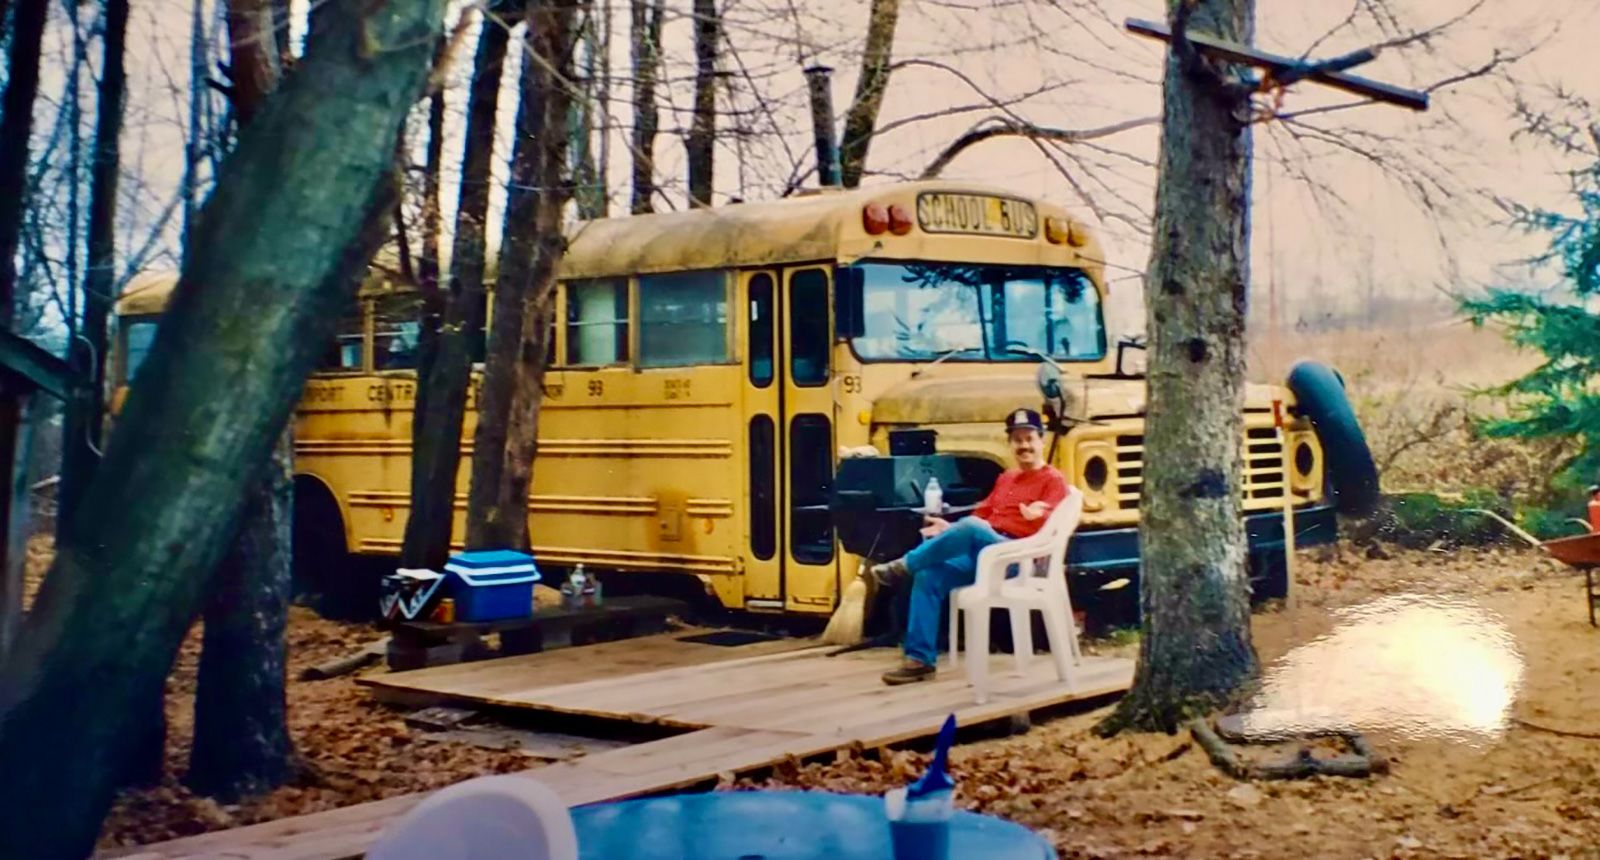 Hill's grandpa and stepdad (pictured) converted an old school bus into a skoolie that she used to play and sleep in as a kid.